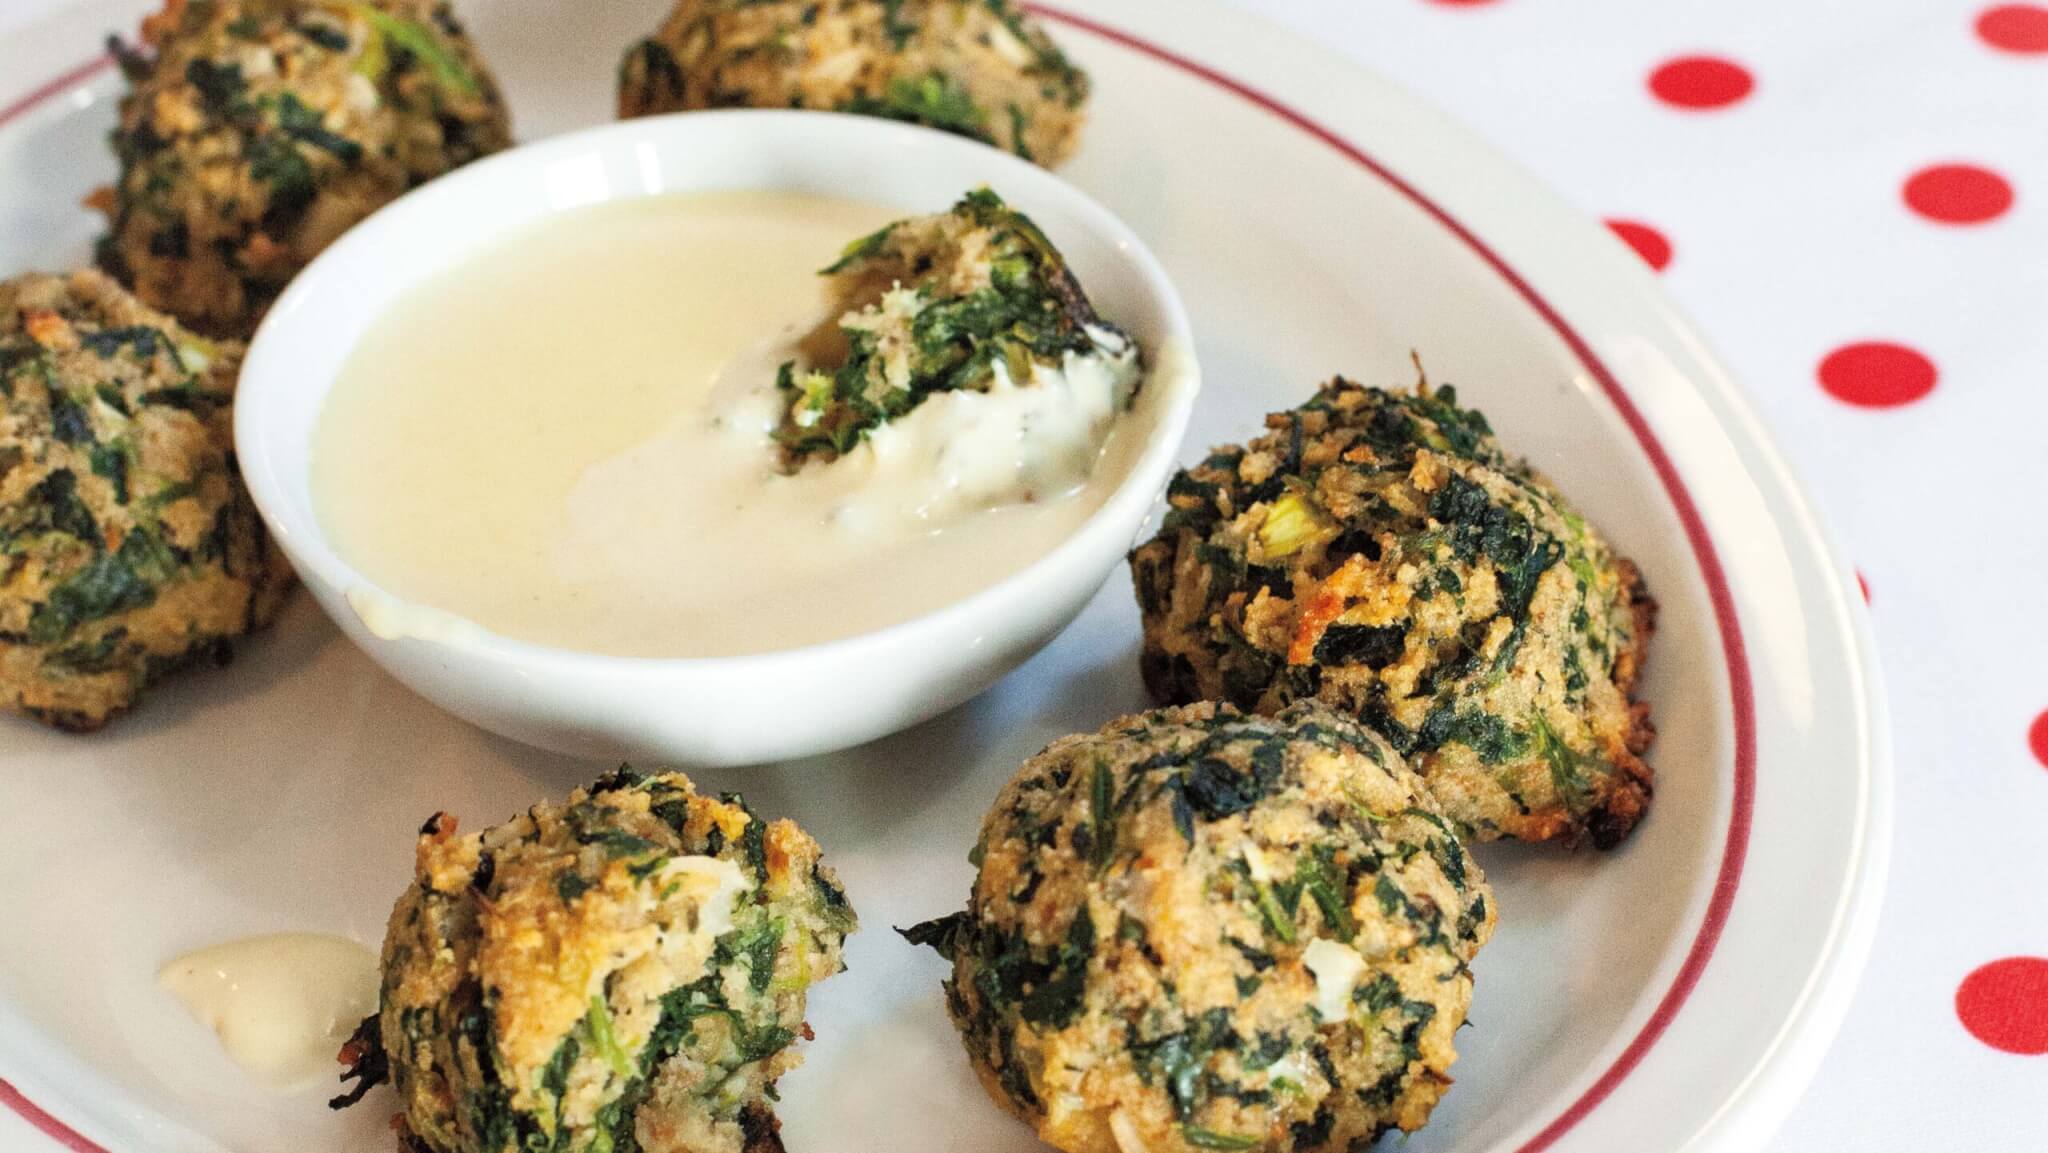 Maxwell's of Morgantown
West Virginia
Spinach spin balls and dijon sauce